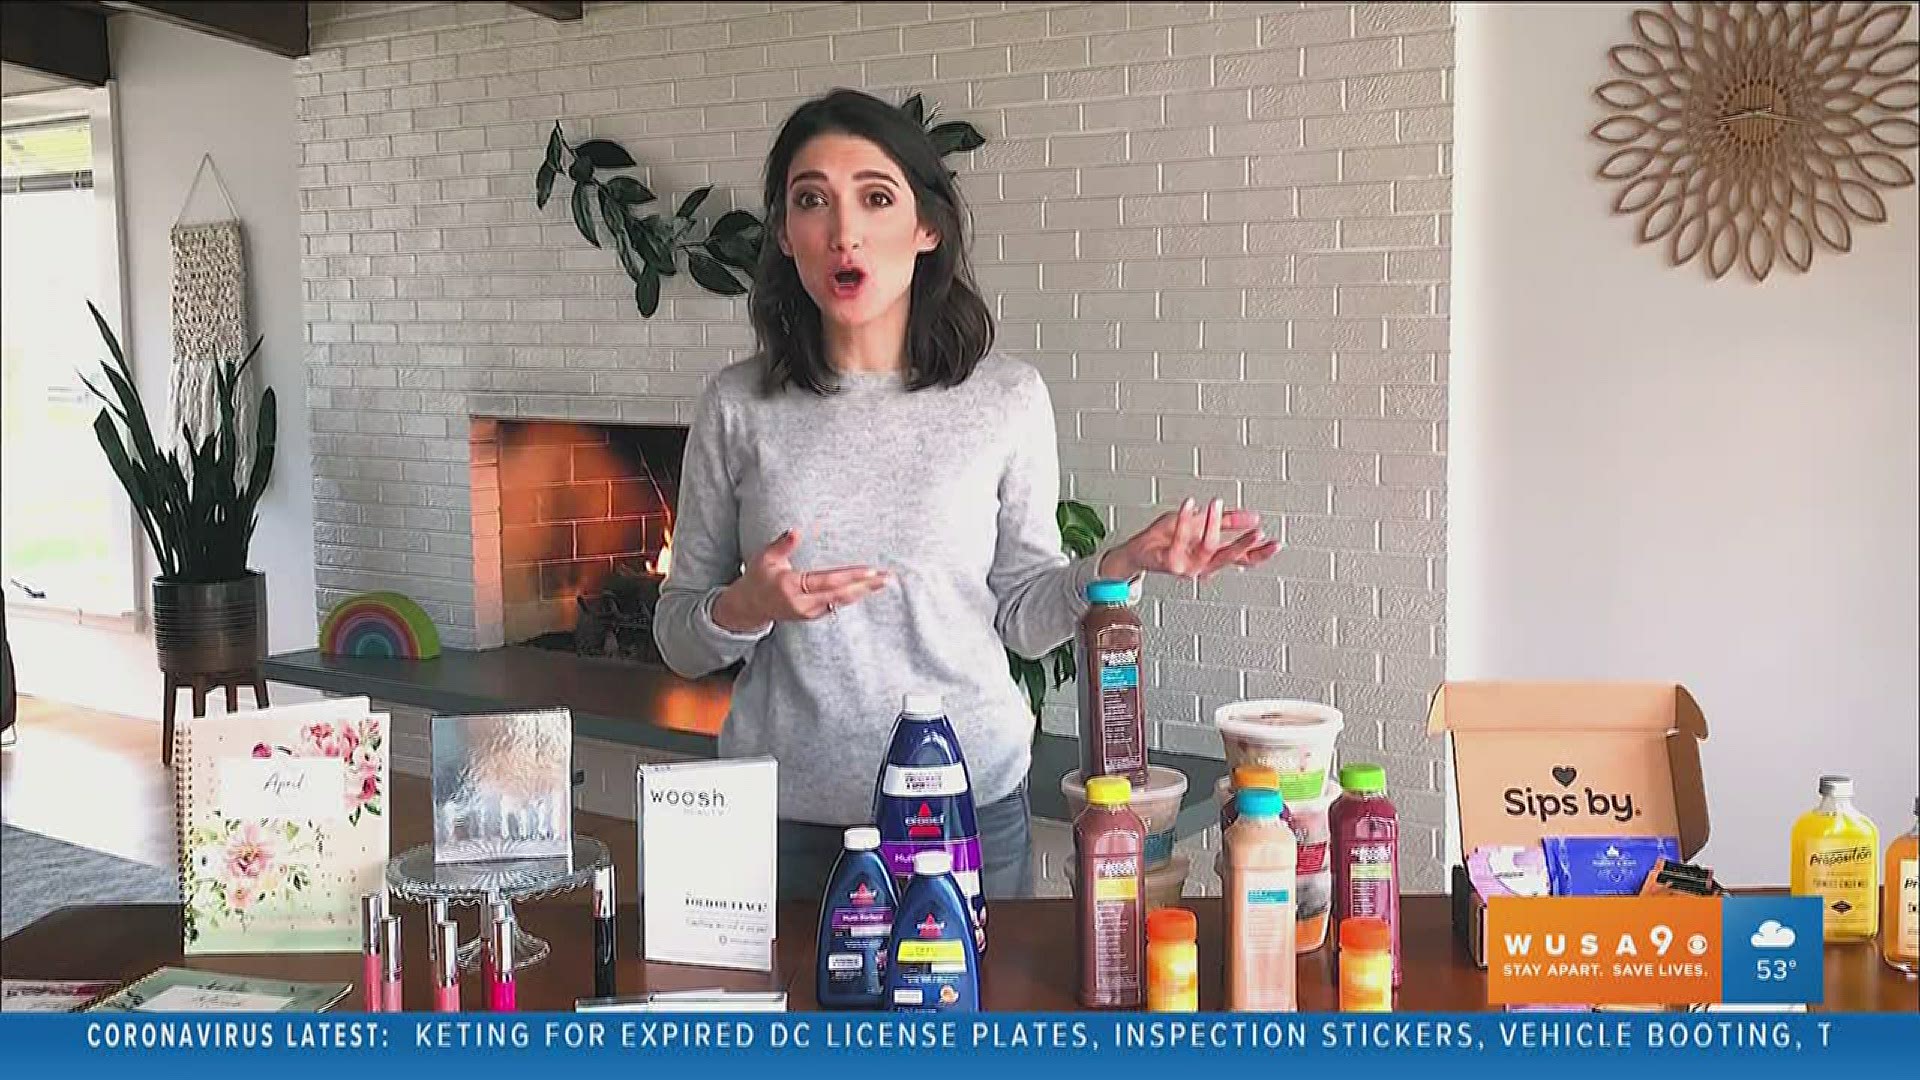 Lifestyle expert, Emily Richett shares the top products to help us stay healthy and productive during social distancing.